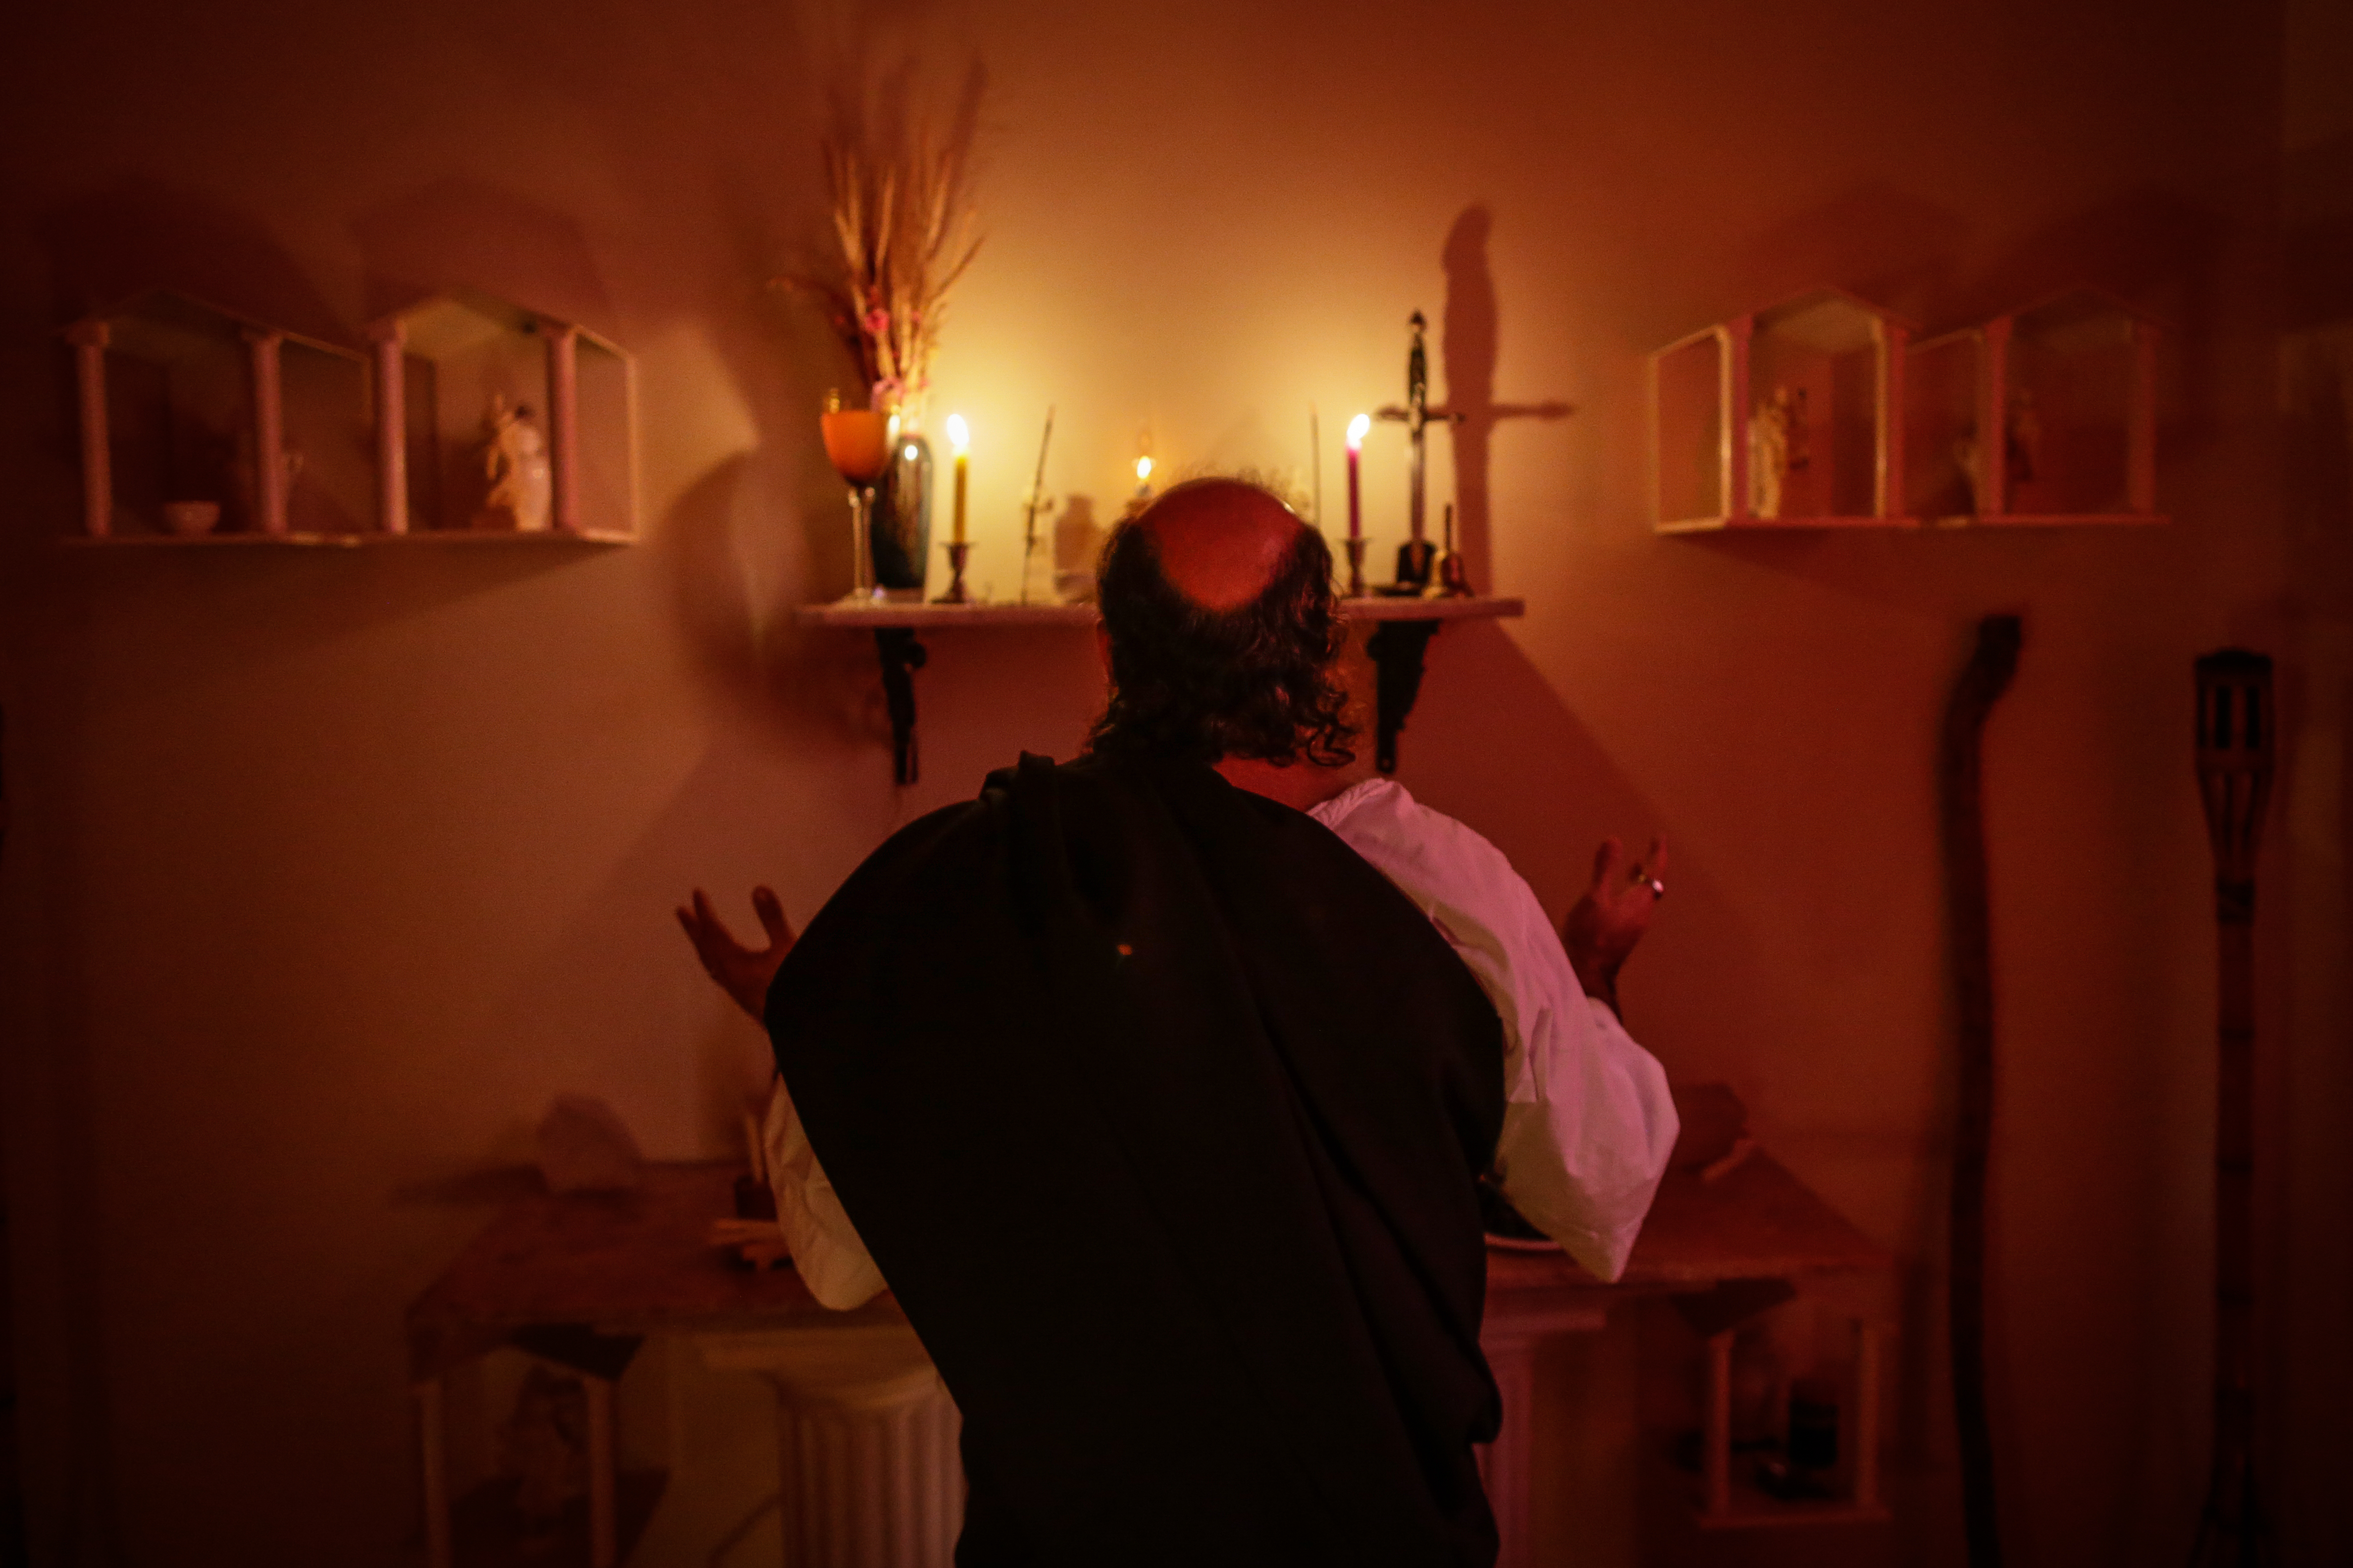 A Wiccan priest stands in front of an alter in a candlelit room. His back is to the camera.